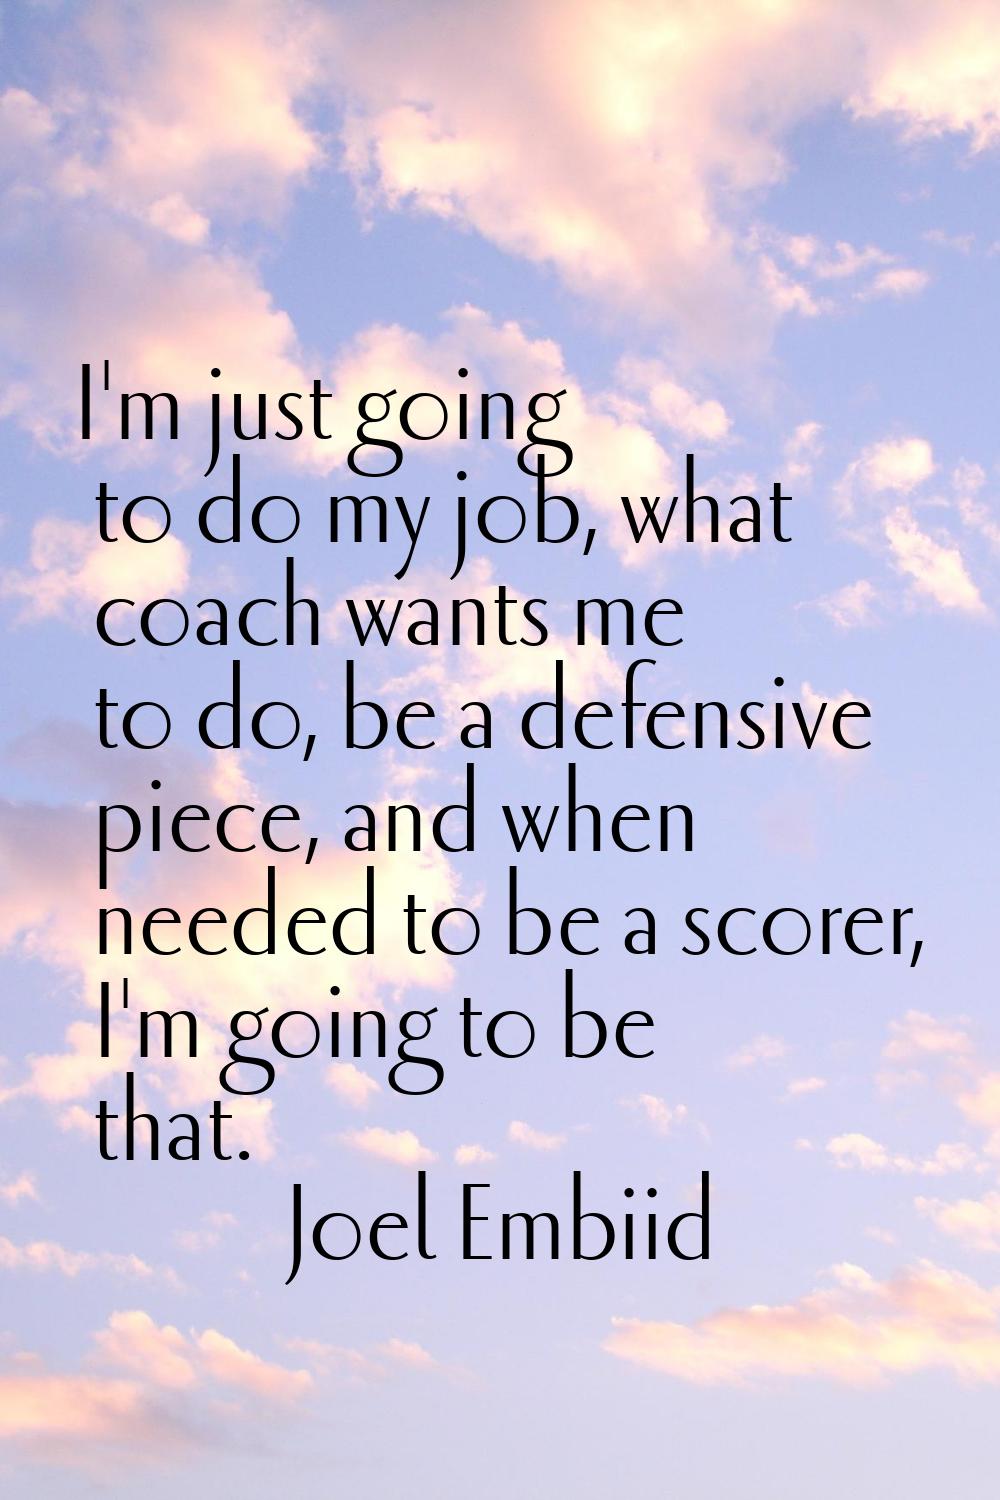 I'm just going to do my job, what coach wants me to do, be a defensive piece, and when needed to be